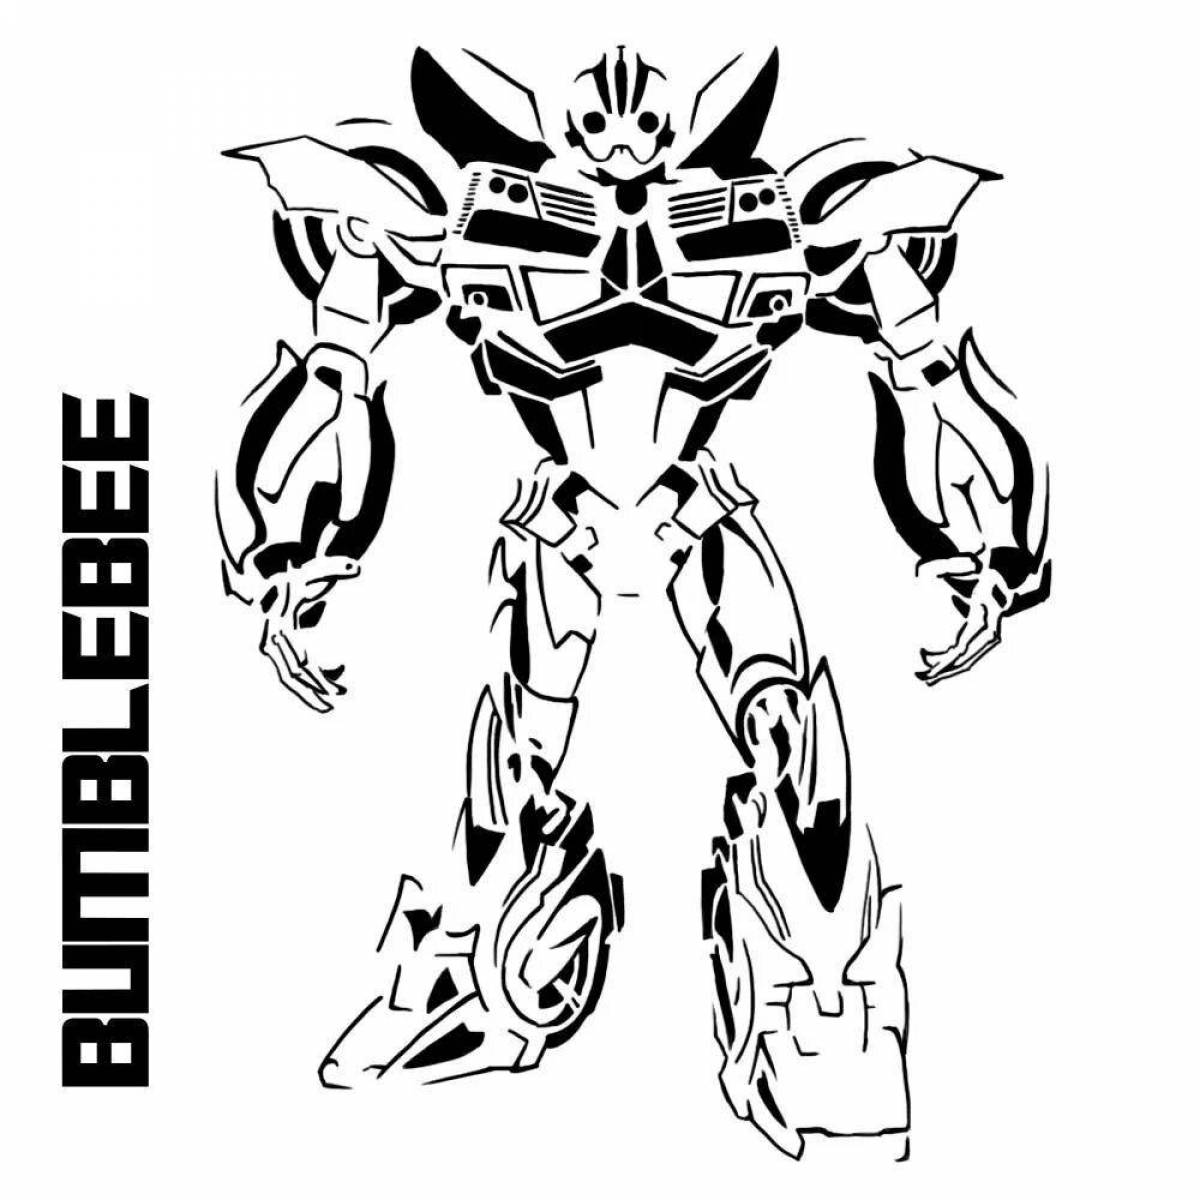 Outstanding bumblebee coloring page for kids